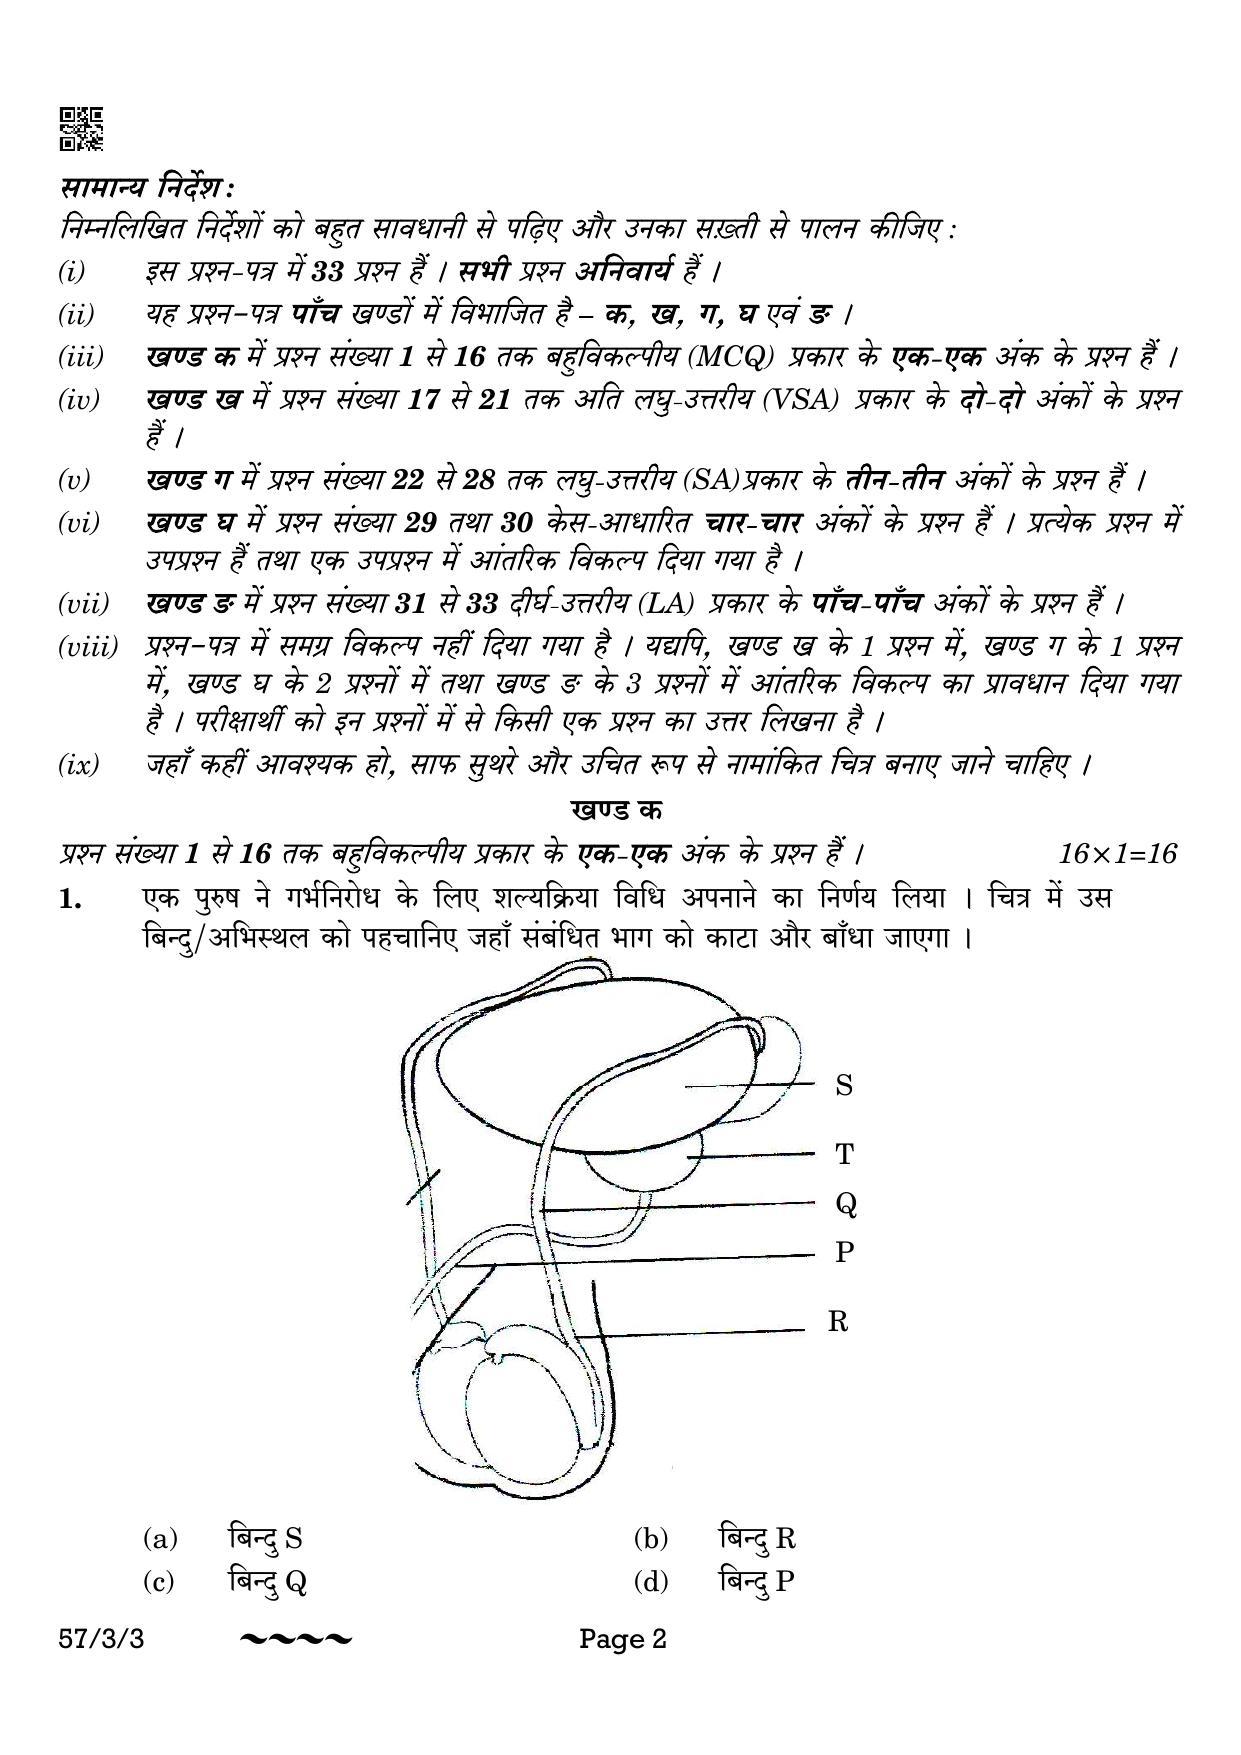 CBSE Class 12 57-3-3 Biology 2023 Question Paper - Page 2